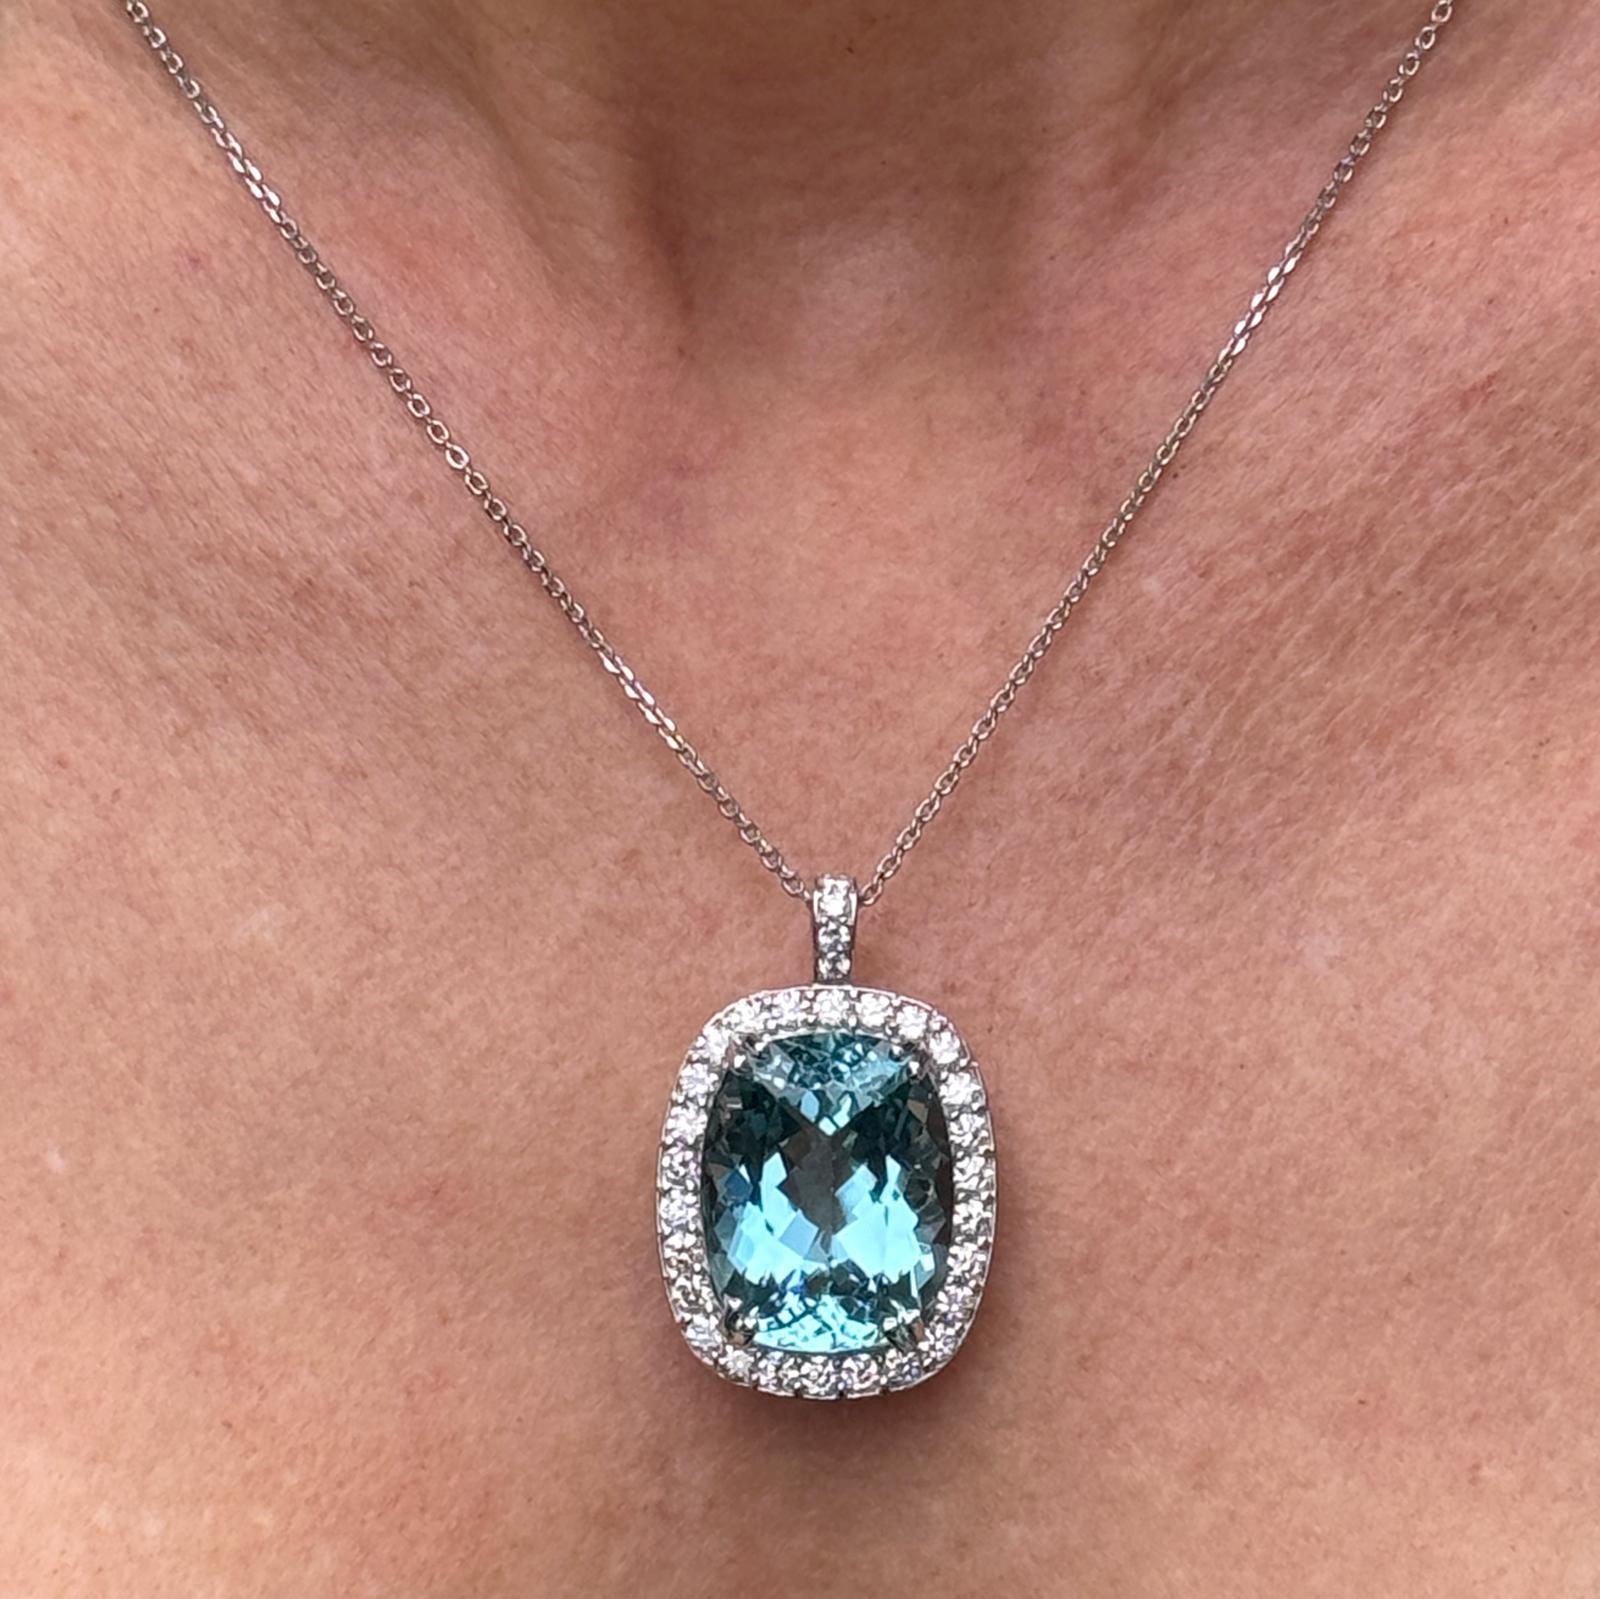 Stunning aquamarine and diamond pendant handcrafted in 18 karat white gold. The cushion cut blue aquamarine gemstone weighs 24.75 carat and has been certified by the GIA. The aquamarine is surrounded by 31 round brilliant cut diamonds weighing